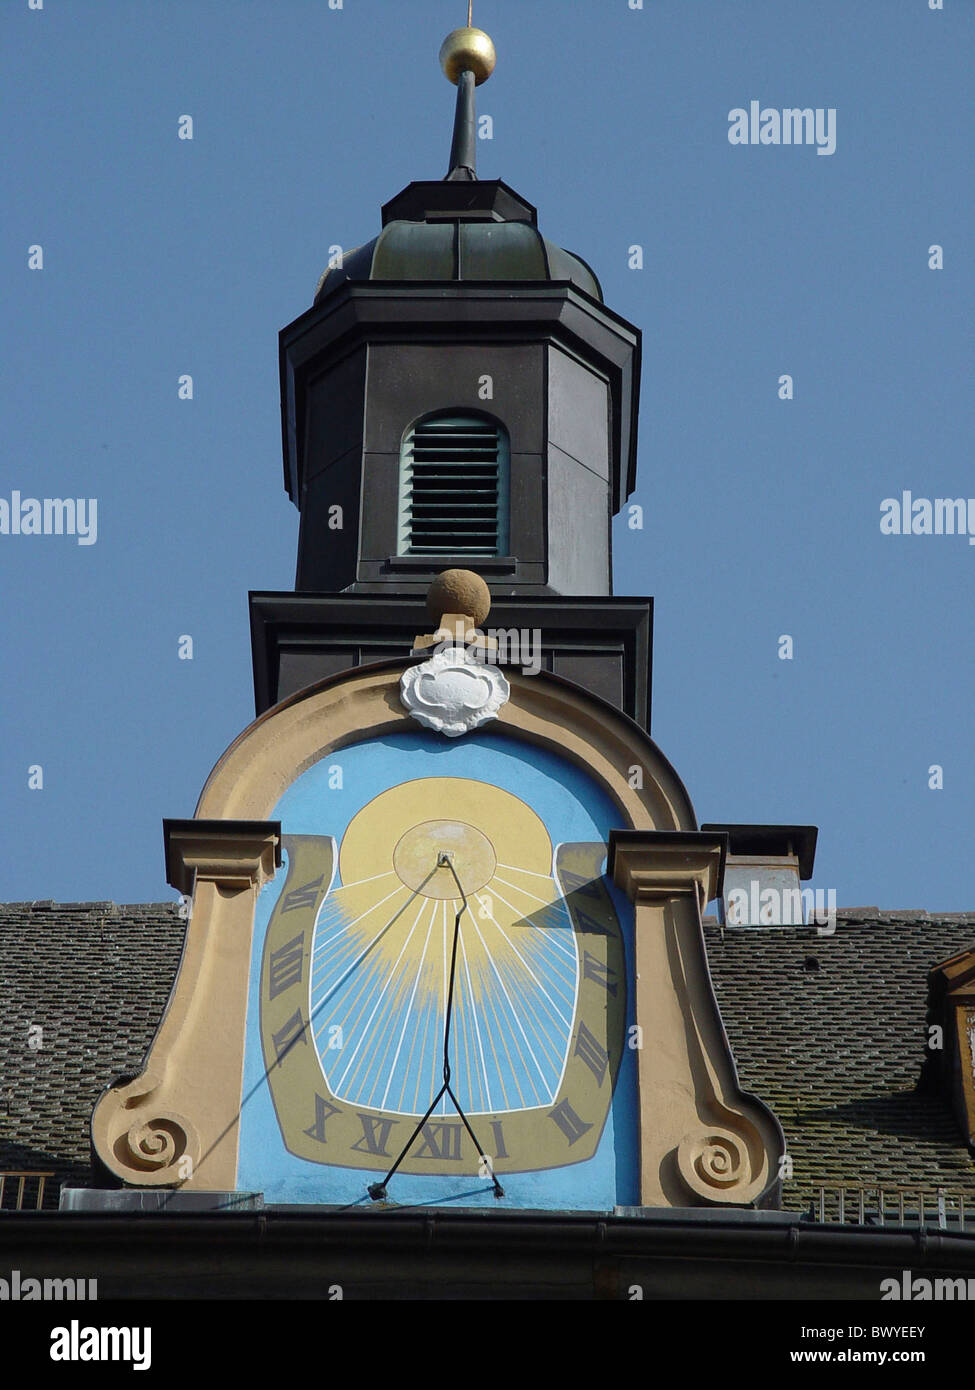 architecture roof detail building construction house home sky solar clock tower rook clock watch Stock Photo